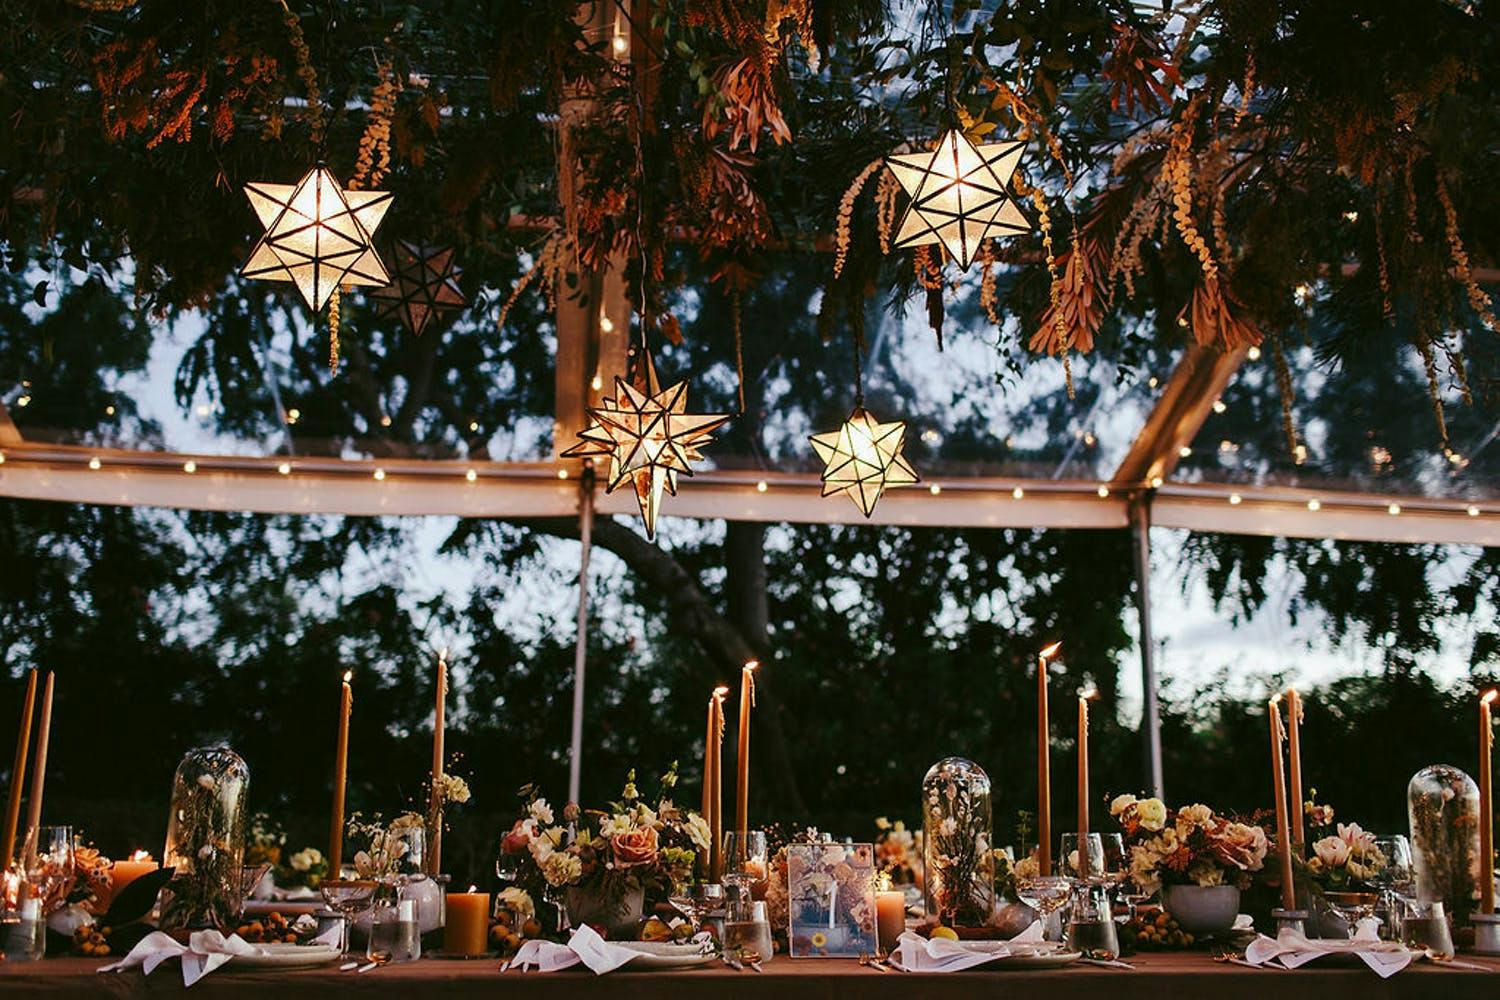 Wedding Tablescape With Cloche Jars, Amber-Hued Blooms, and Suspended Geometric Lanterns | PartySlate